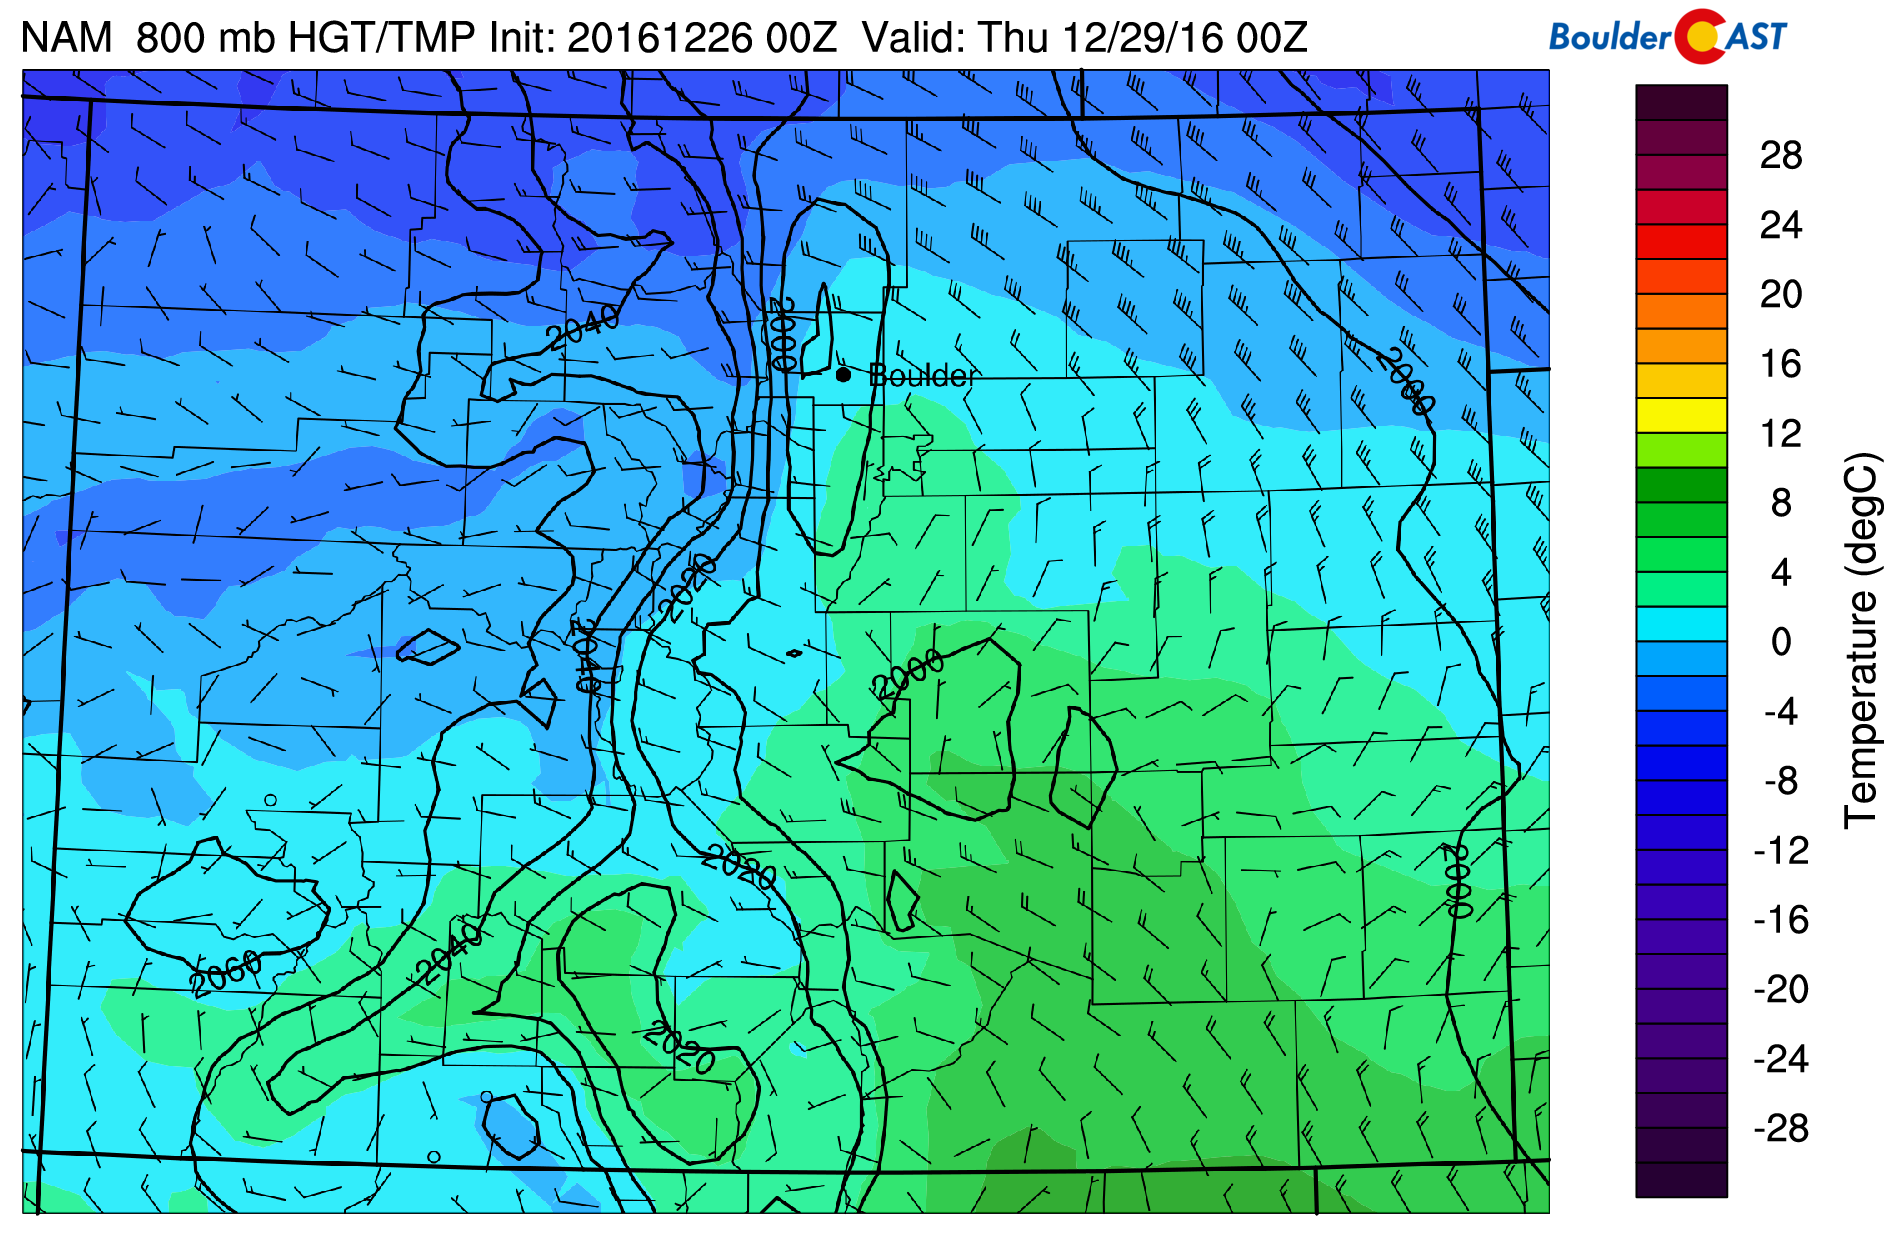 NAM 800 mb temperature and wind forecast map for Wedfnesdy evening. A weak cold front is moving into Colorado from the northwest